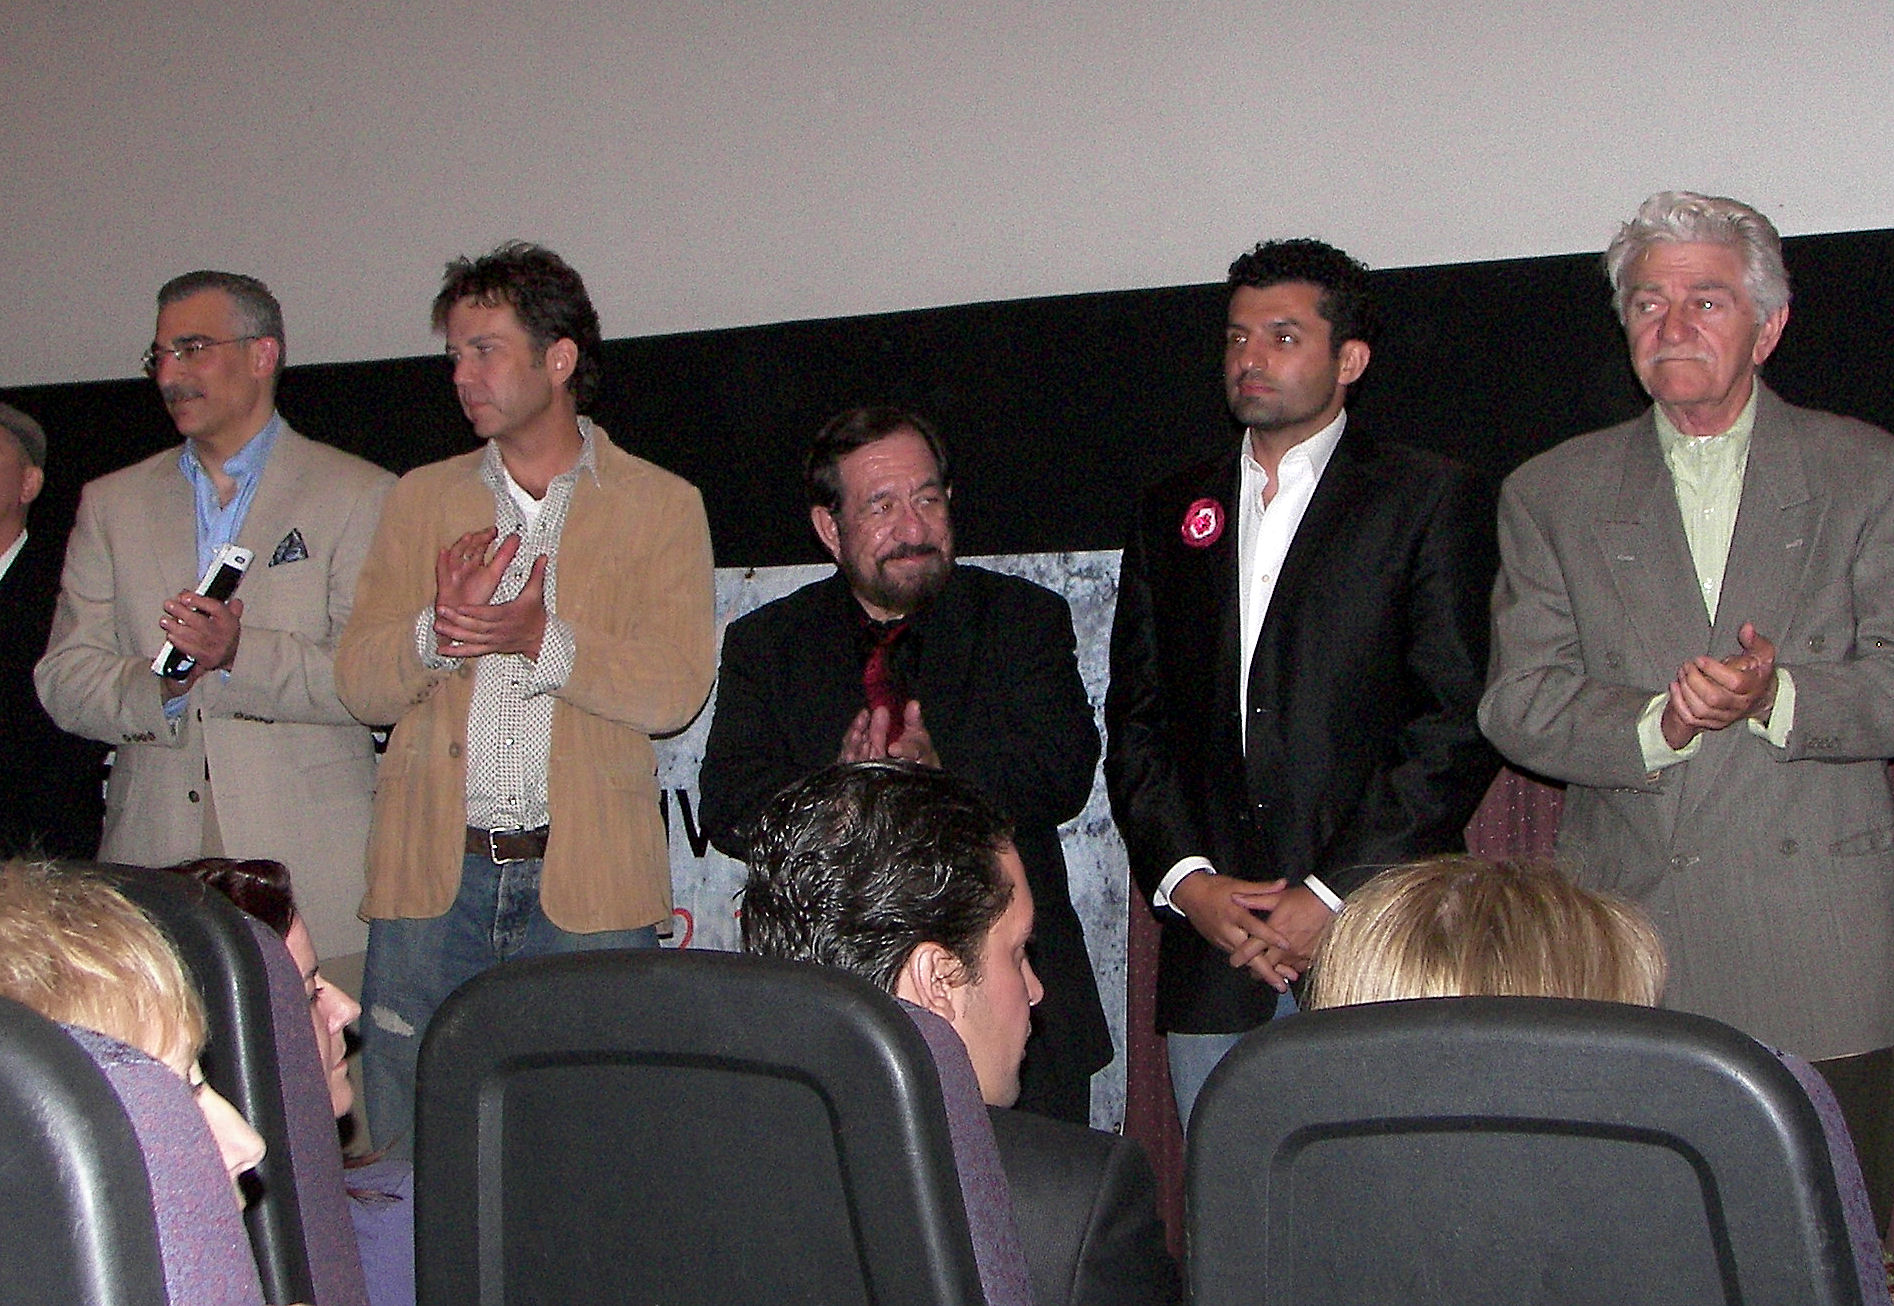 Jesse Wilde with cast of Without Borders at Greek Film Festival and movie premiere at the theatre after screening, June 2011.